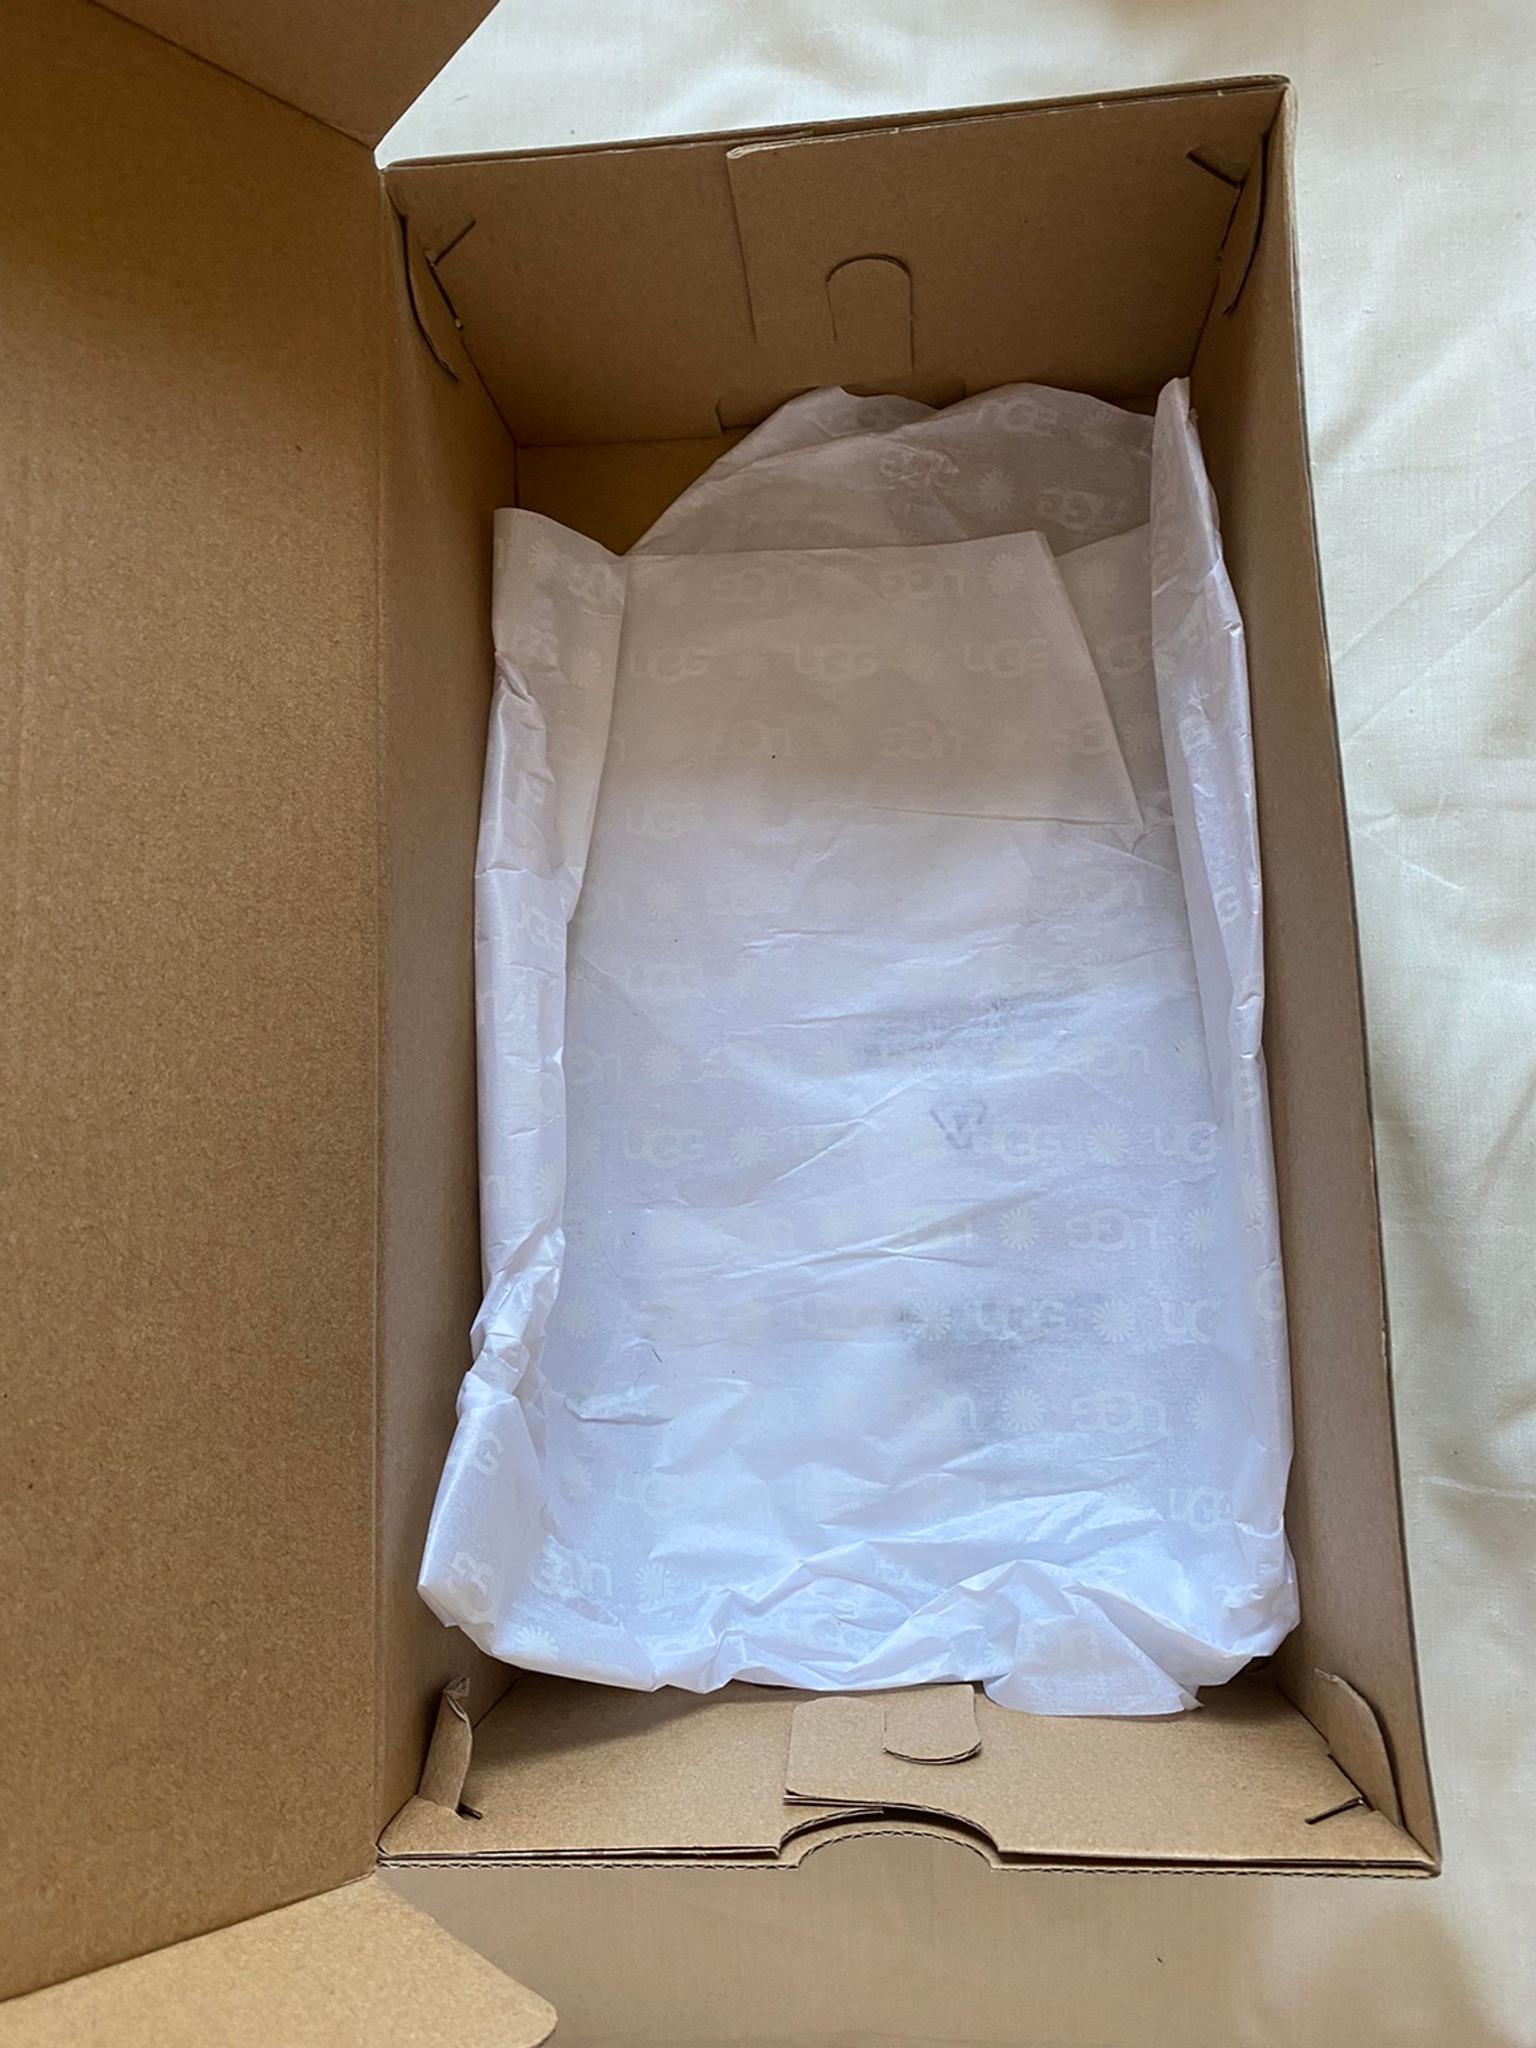 empty ugg box for sale